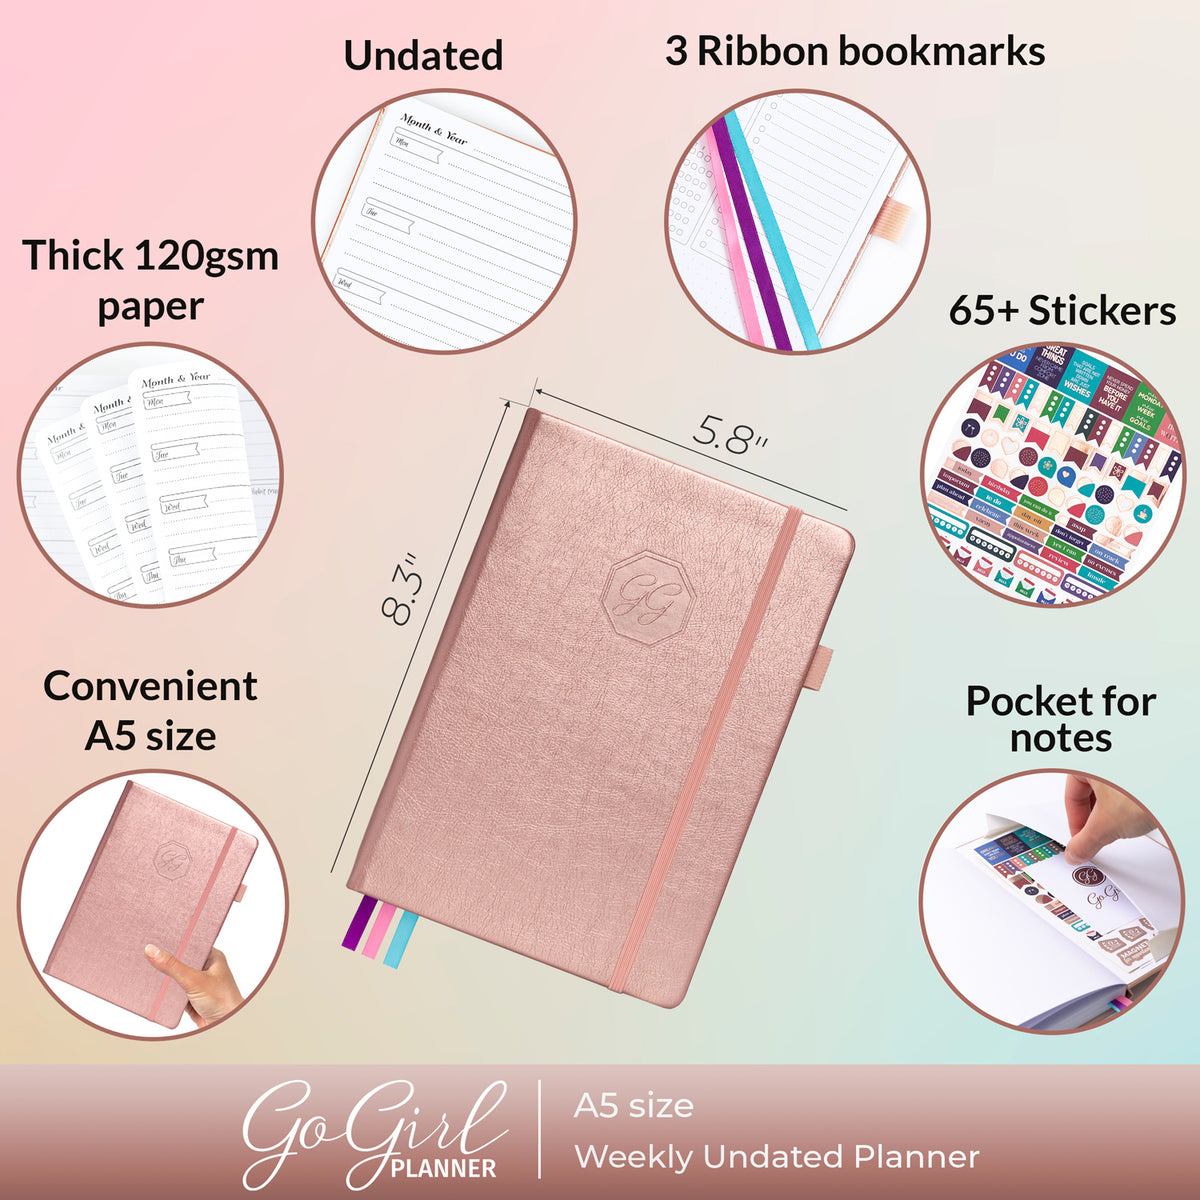 GoGirl Planner and Organizer for Women – Pocket Size Weekly Planner, Goals  Journal & Agenda to Improve Time Management, Productivity & Live Happier.